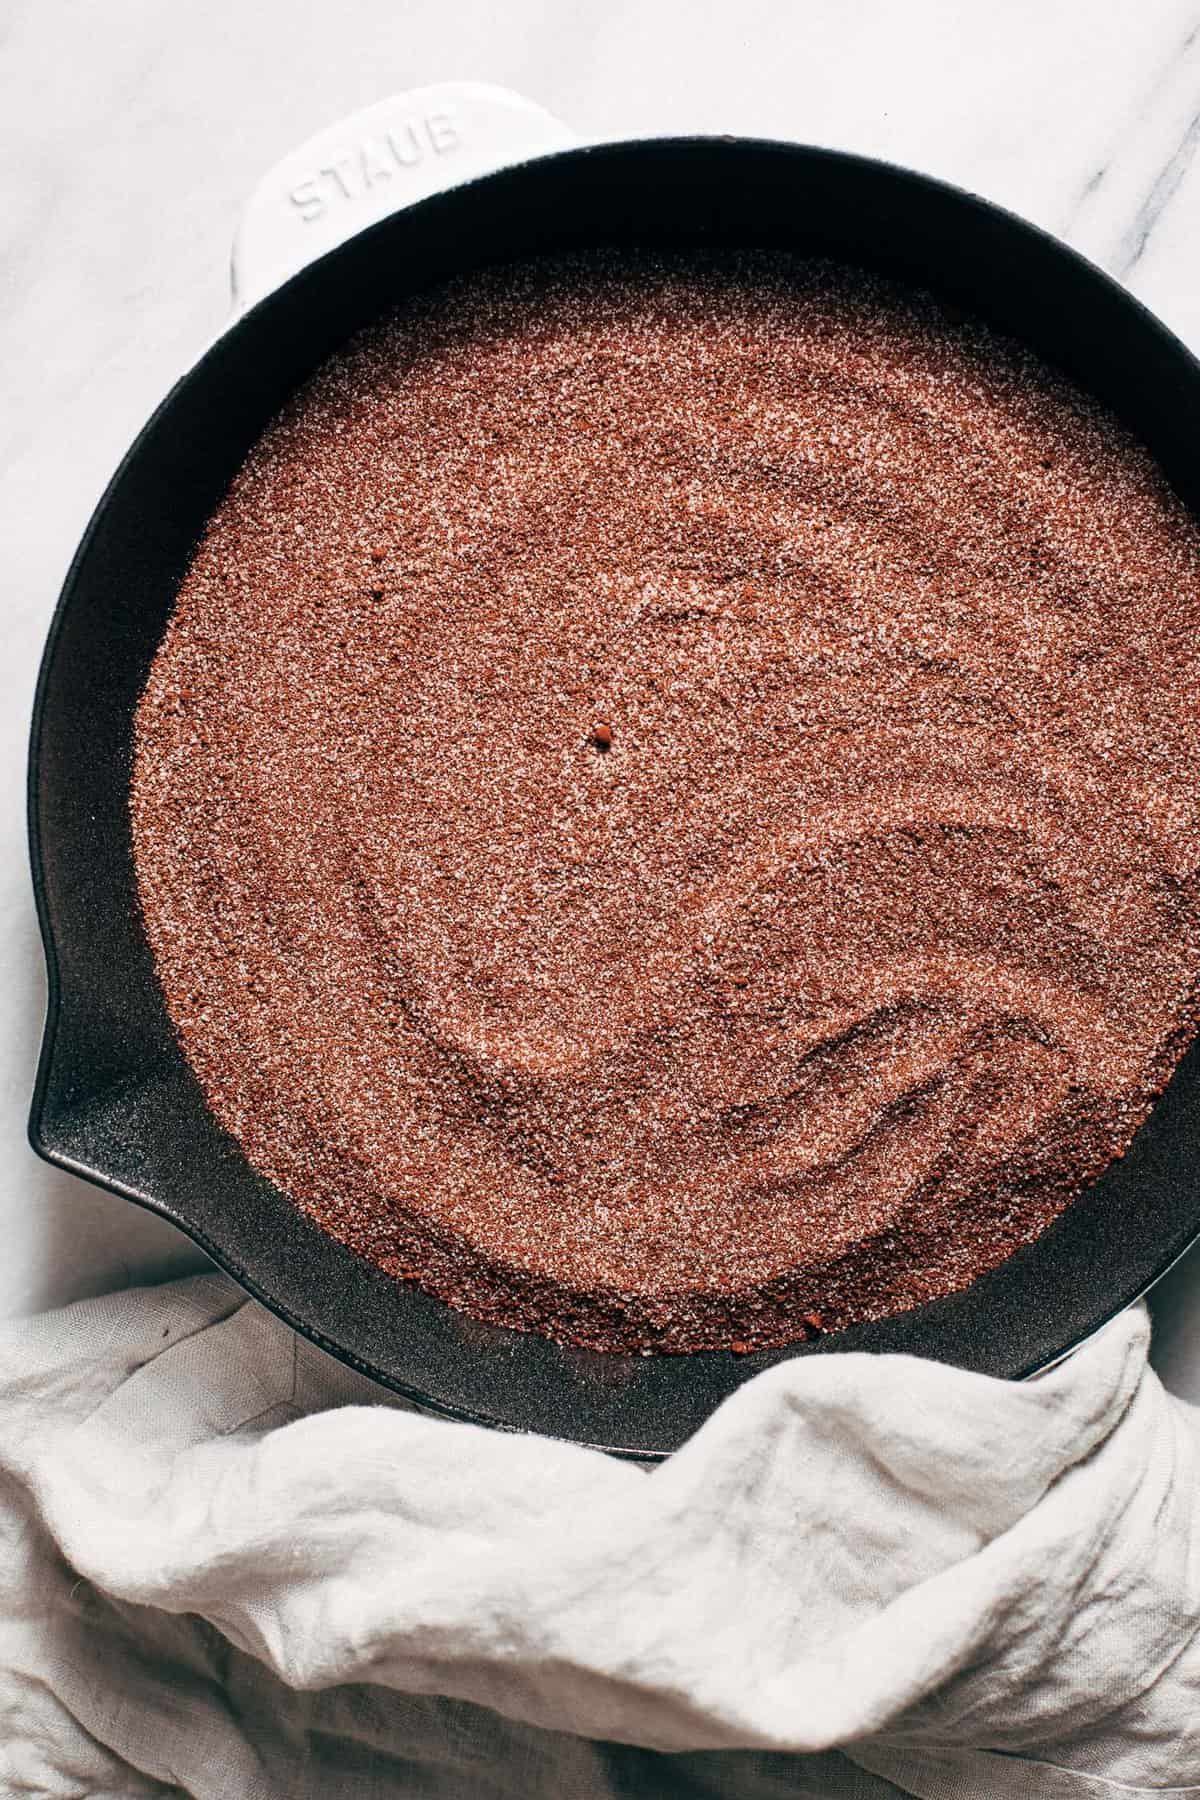 sugar and cocoa powder layered on top of chocolate cake batter